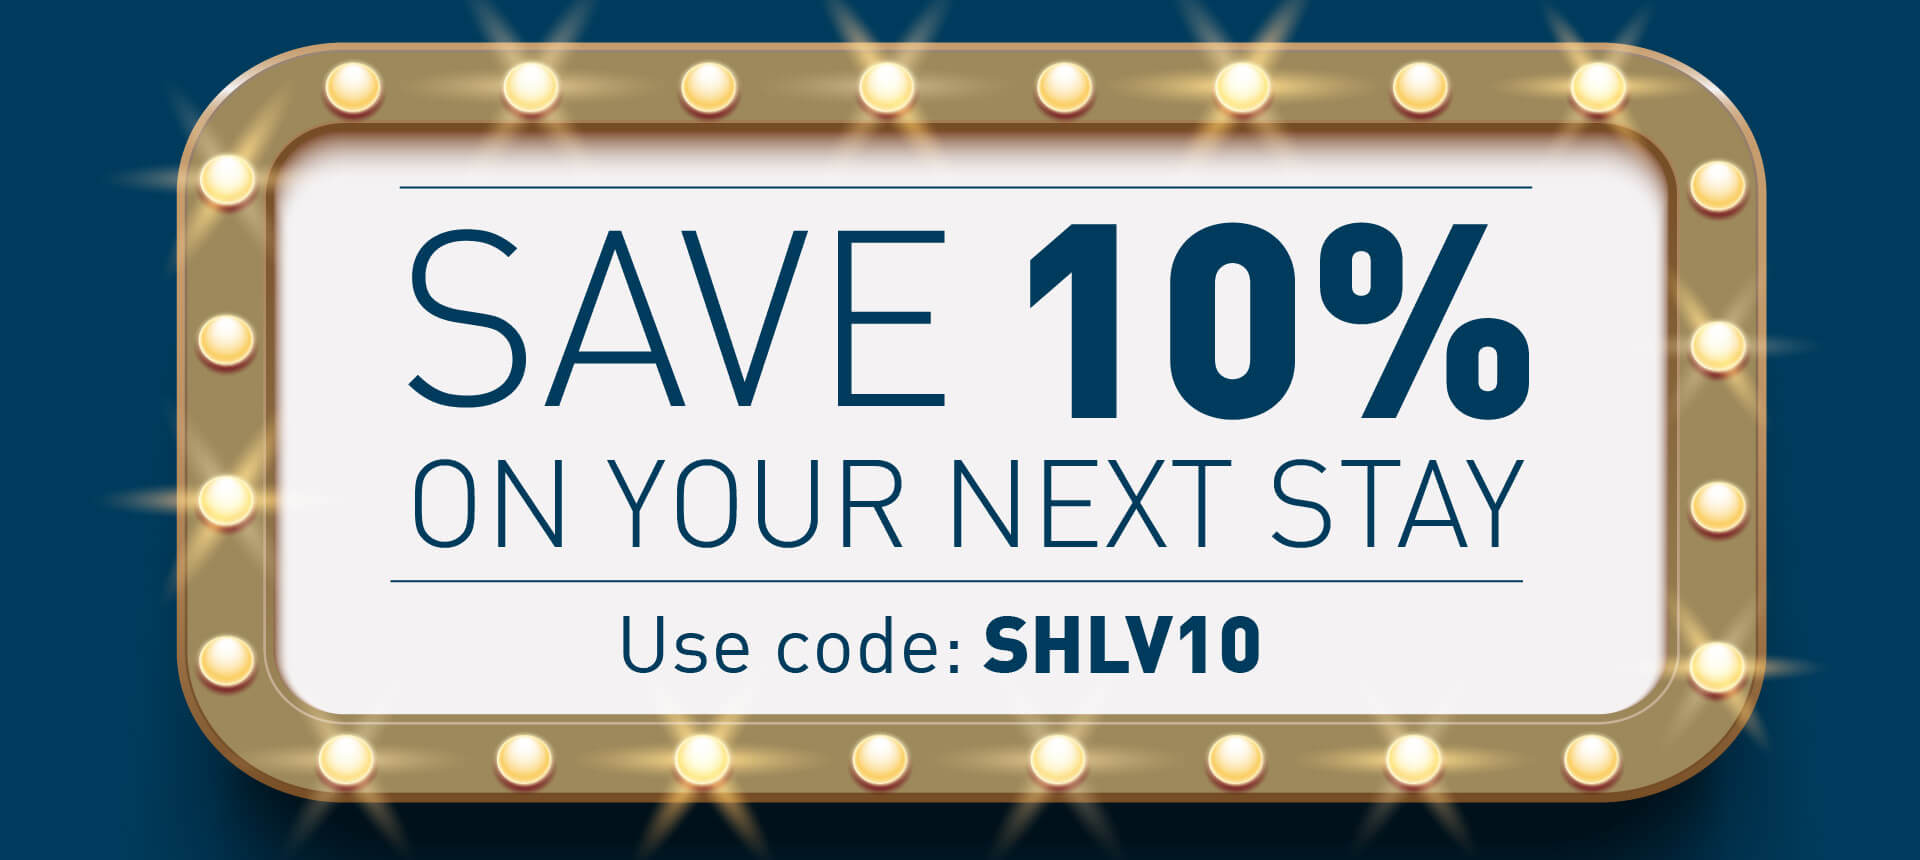 Save 10% on Your Next Stay at Sidney Hotel London